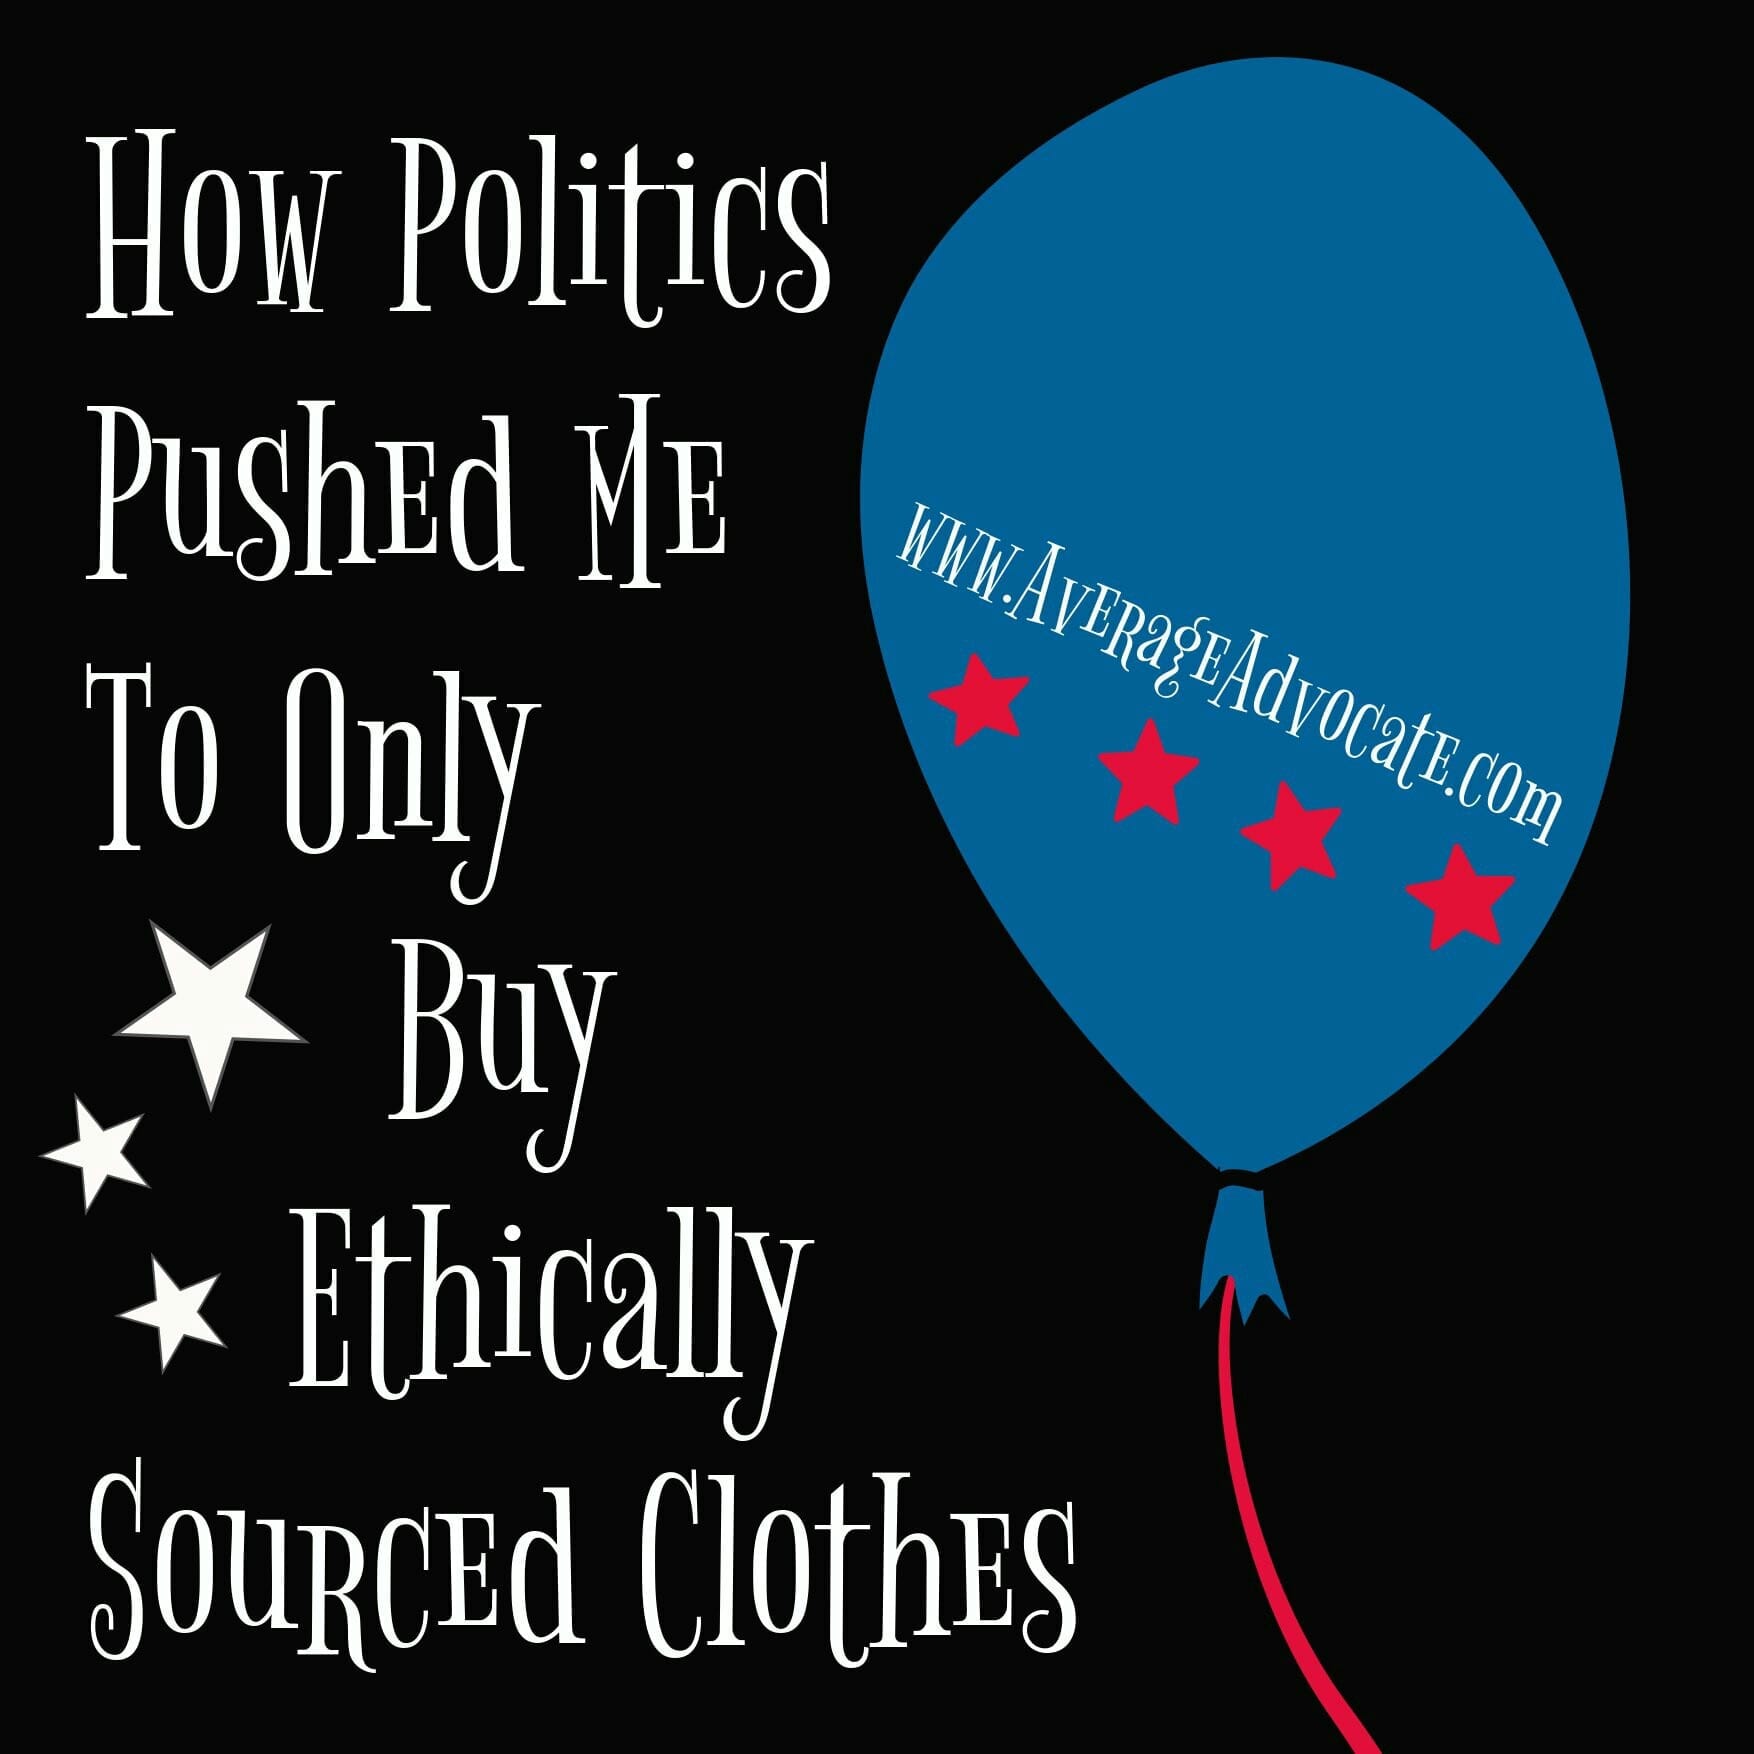 How Politics Pushed Me To Only Buy Ethically Sourced Clothes